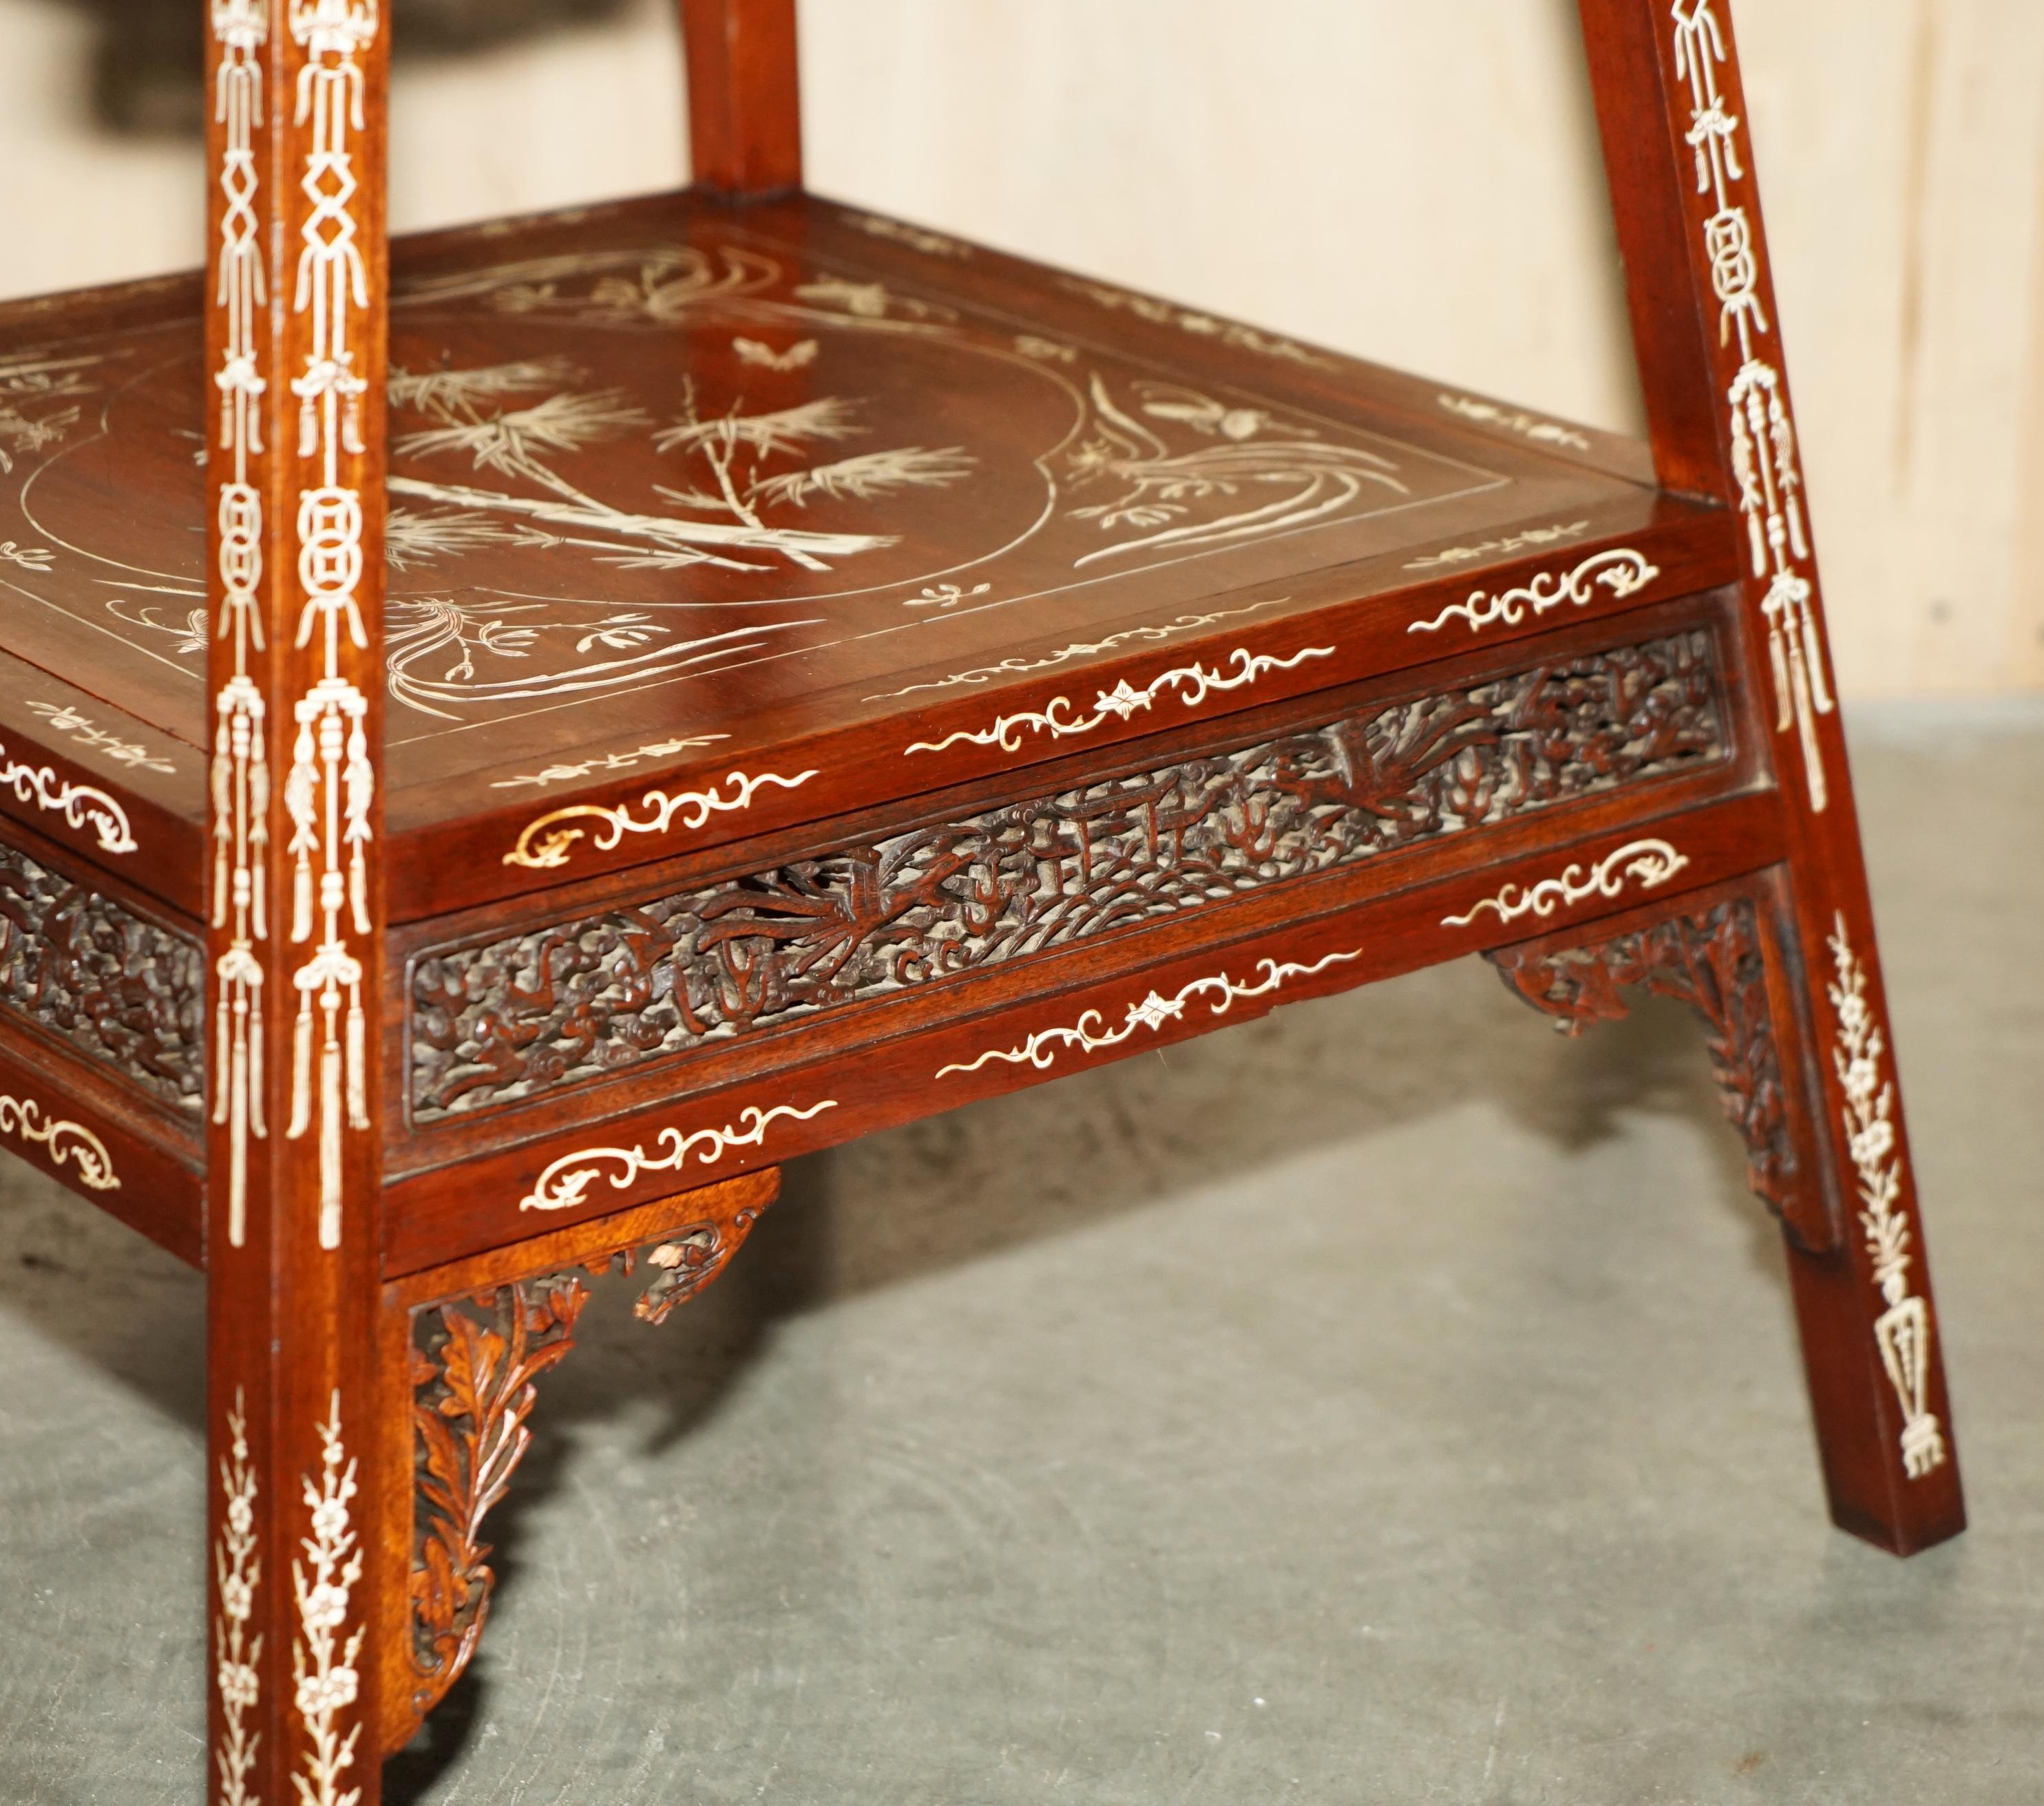 ANTIQUE CIRCA 1900ORNATELY CARVED AND HEAViLY INLAID CHINESE OCCASIONAL TABLE im Angebot 1